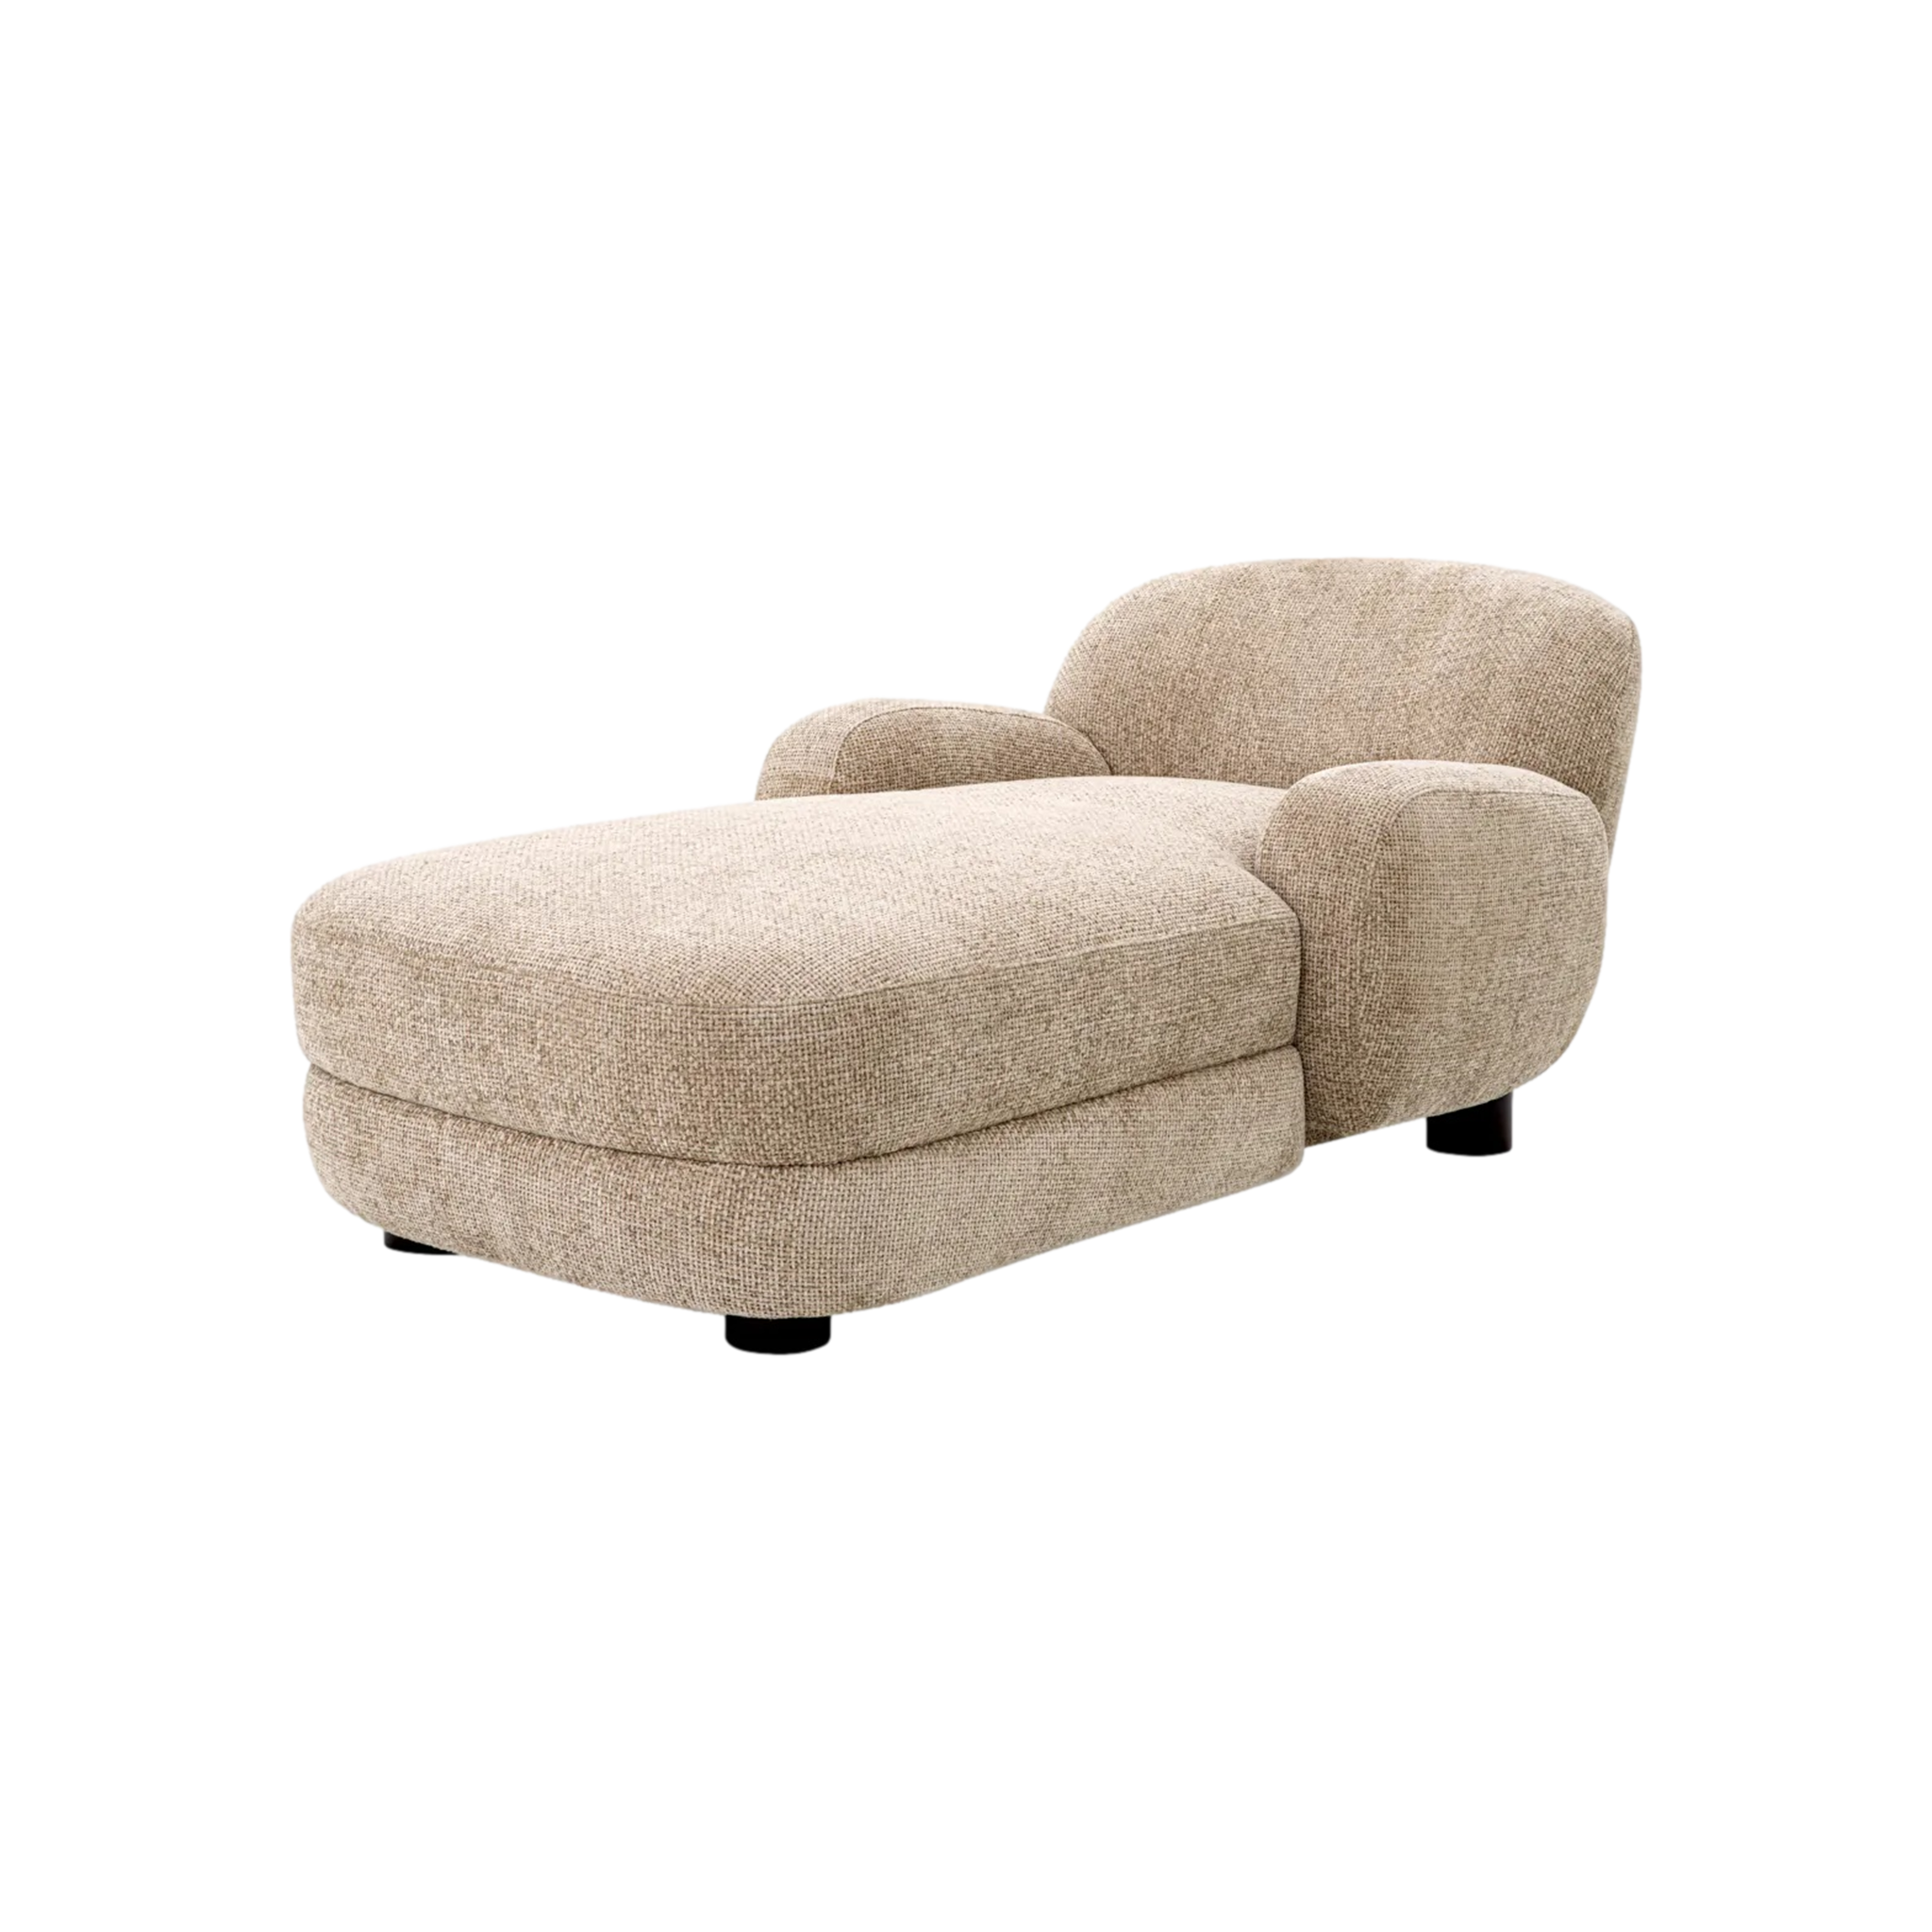 Udine Chaise Lounge in Sand